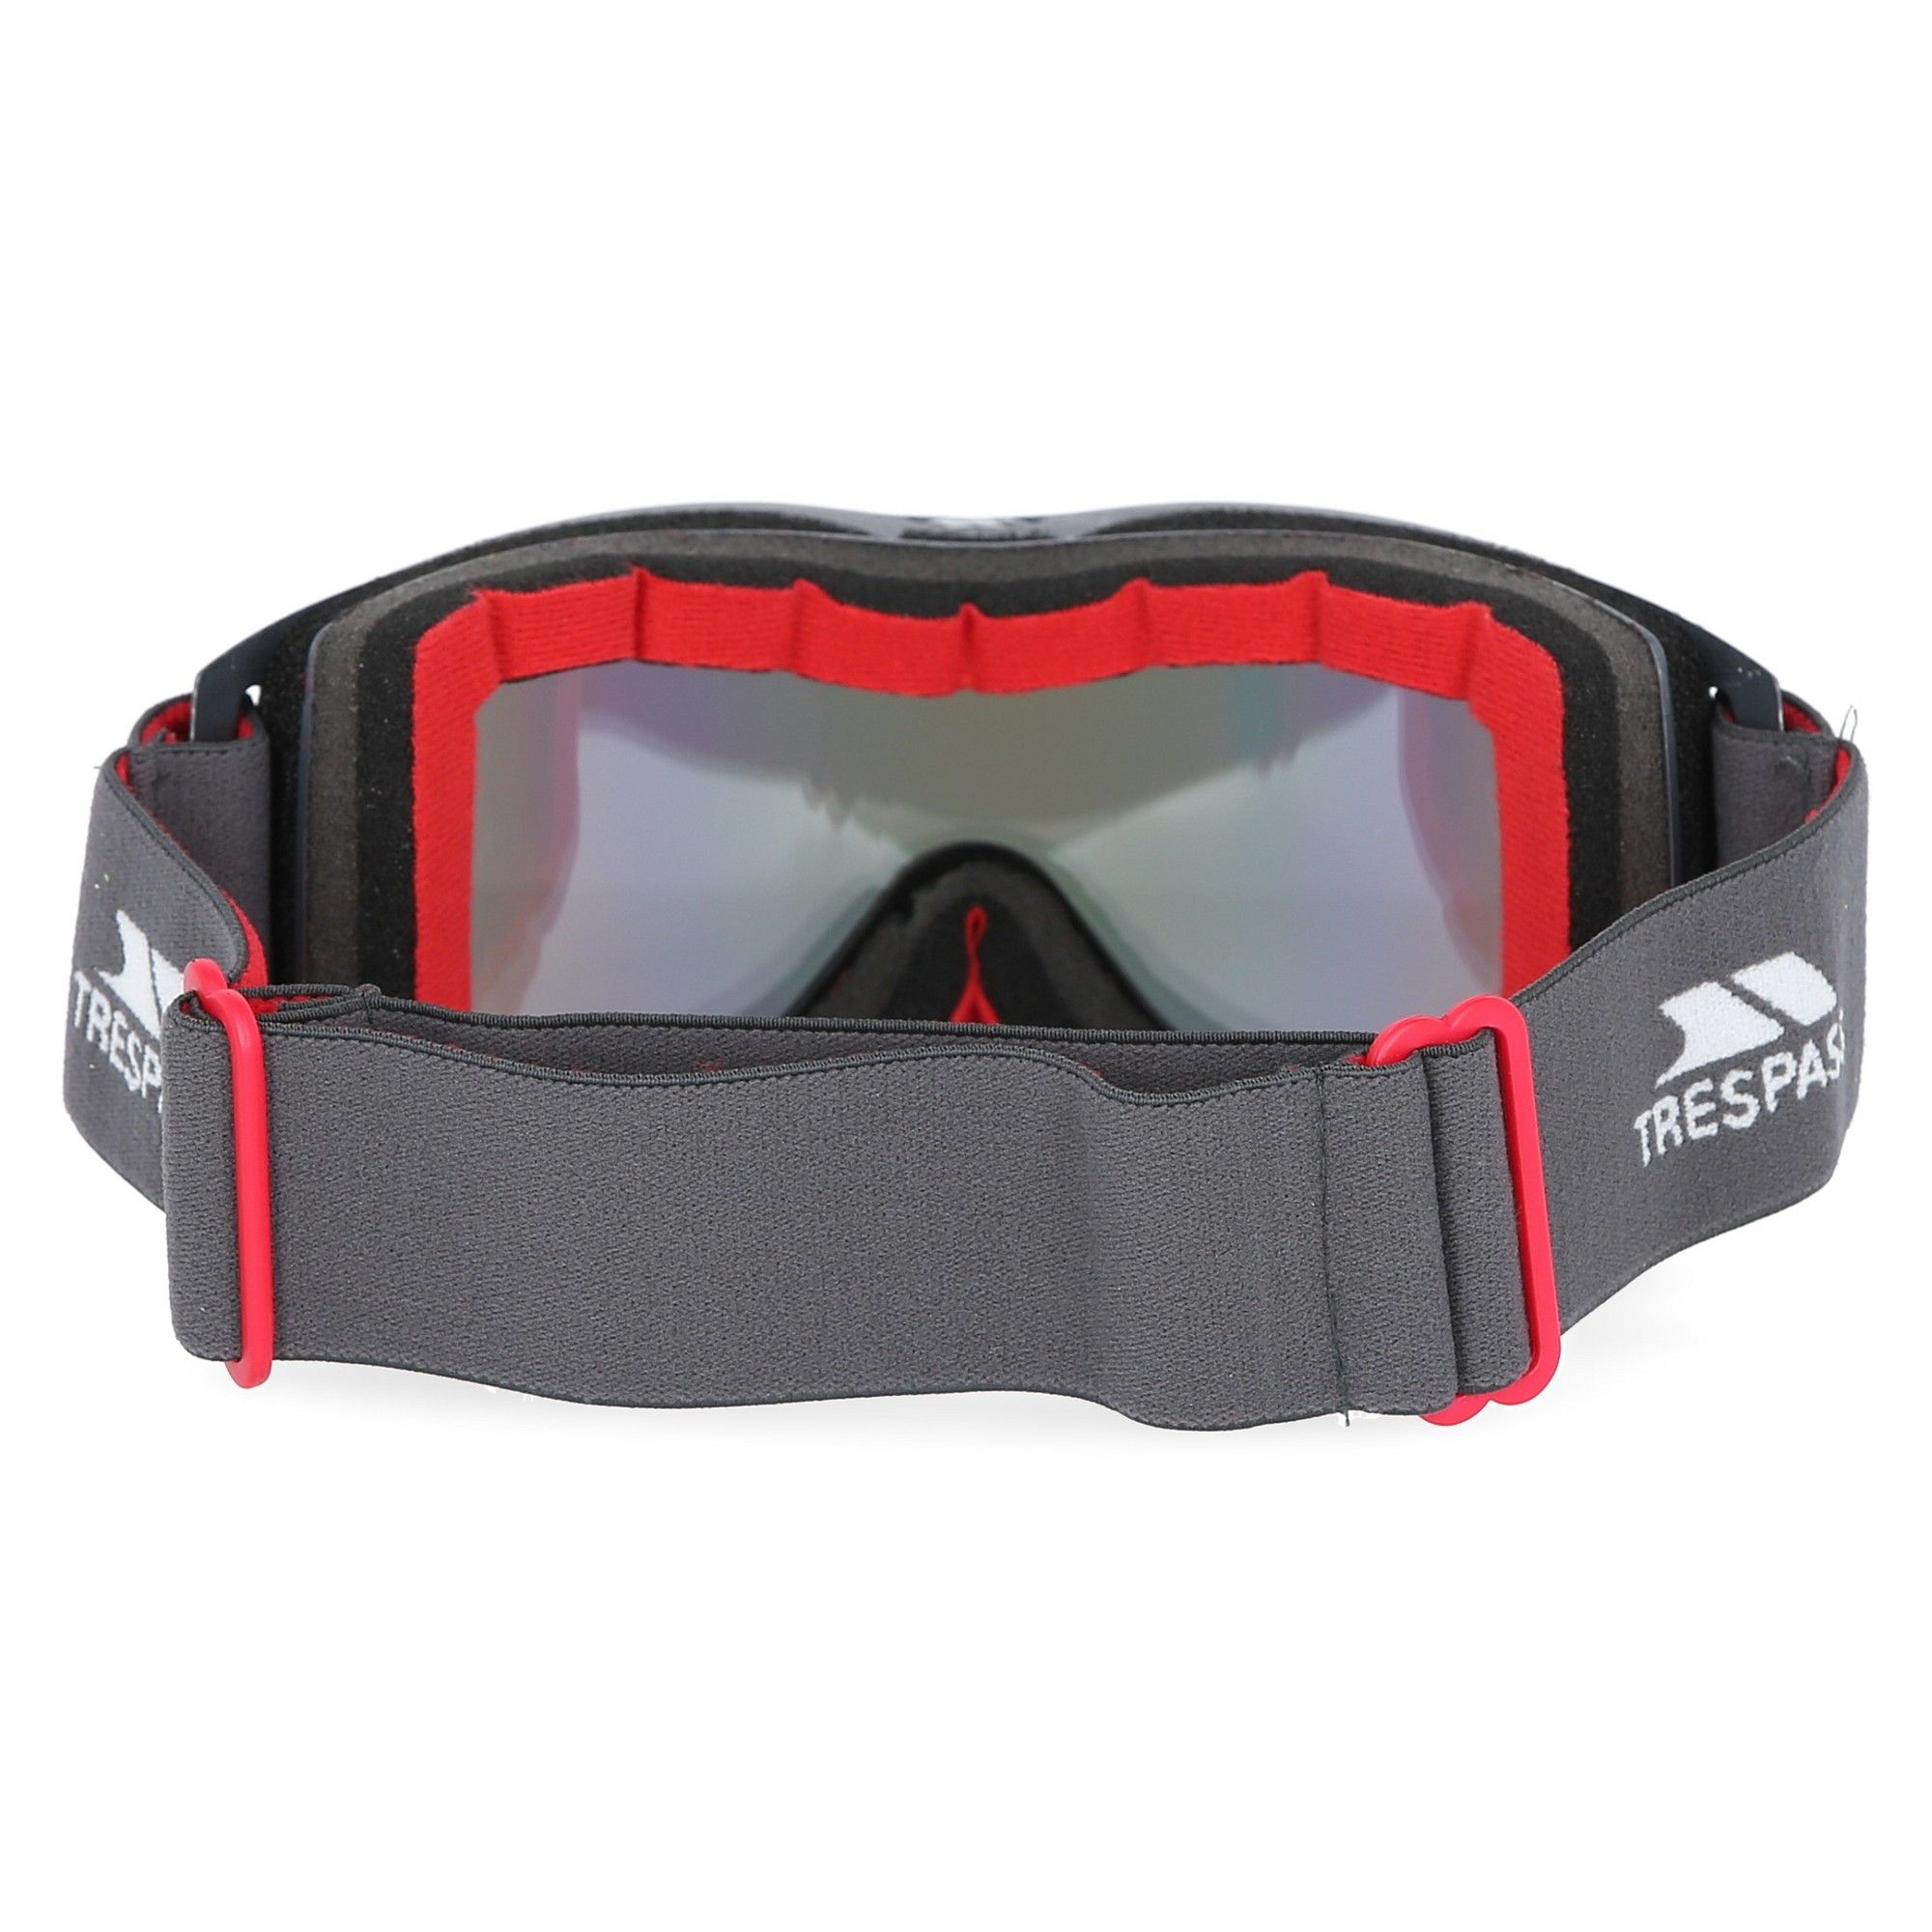 Petrol effect mirrored dual lens. Printed frame. UV 400nm protection. Antifog coating and strategic ventilation. 3 layer face fitting foam. Adjustable headband.